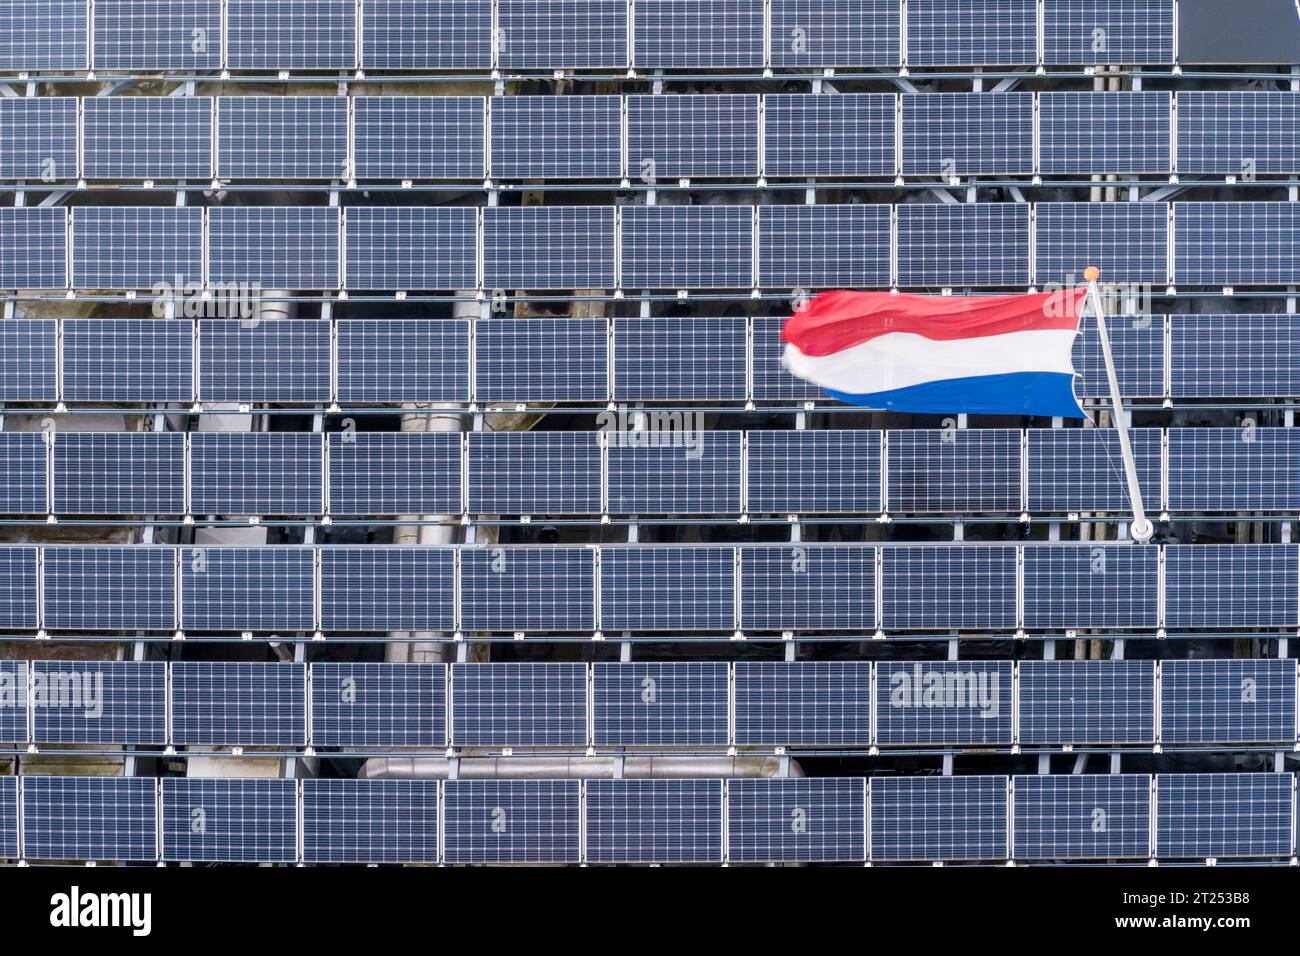 The Dutch flag flying over an array of solar panels or PV cells. Stock Photo